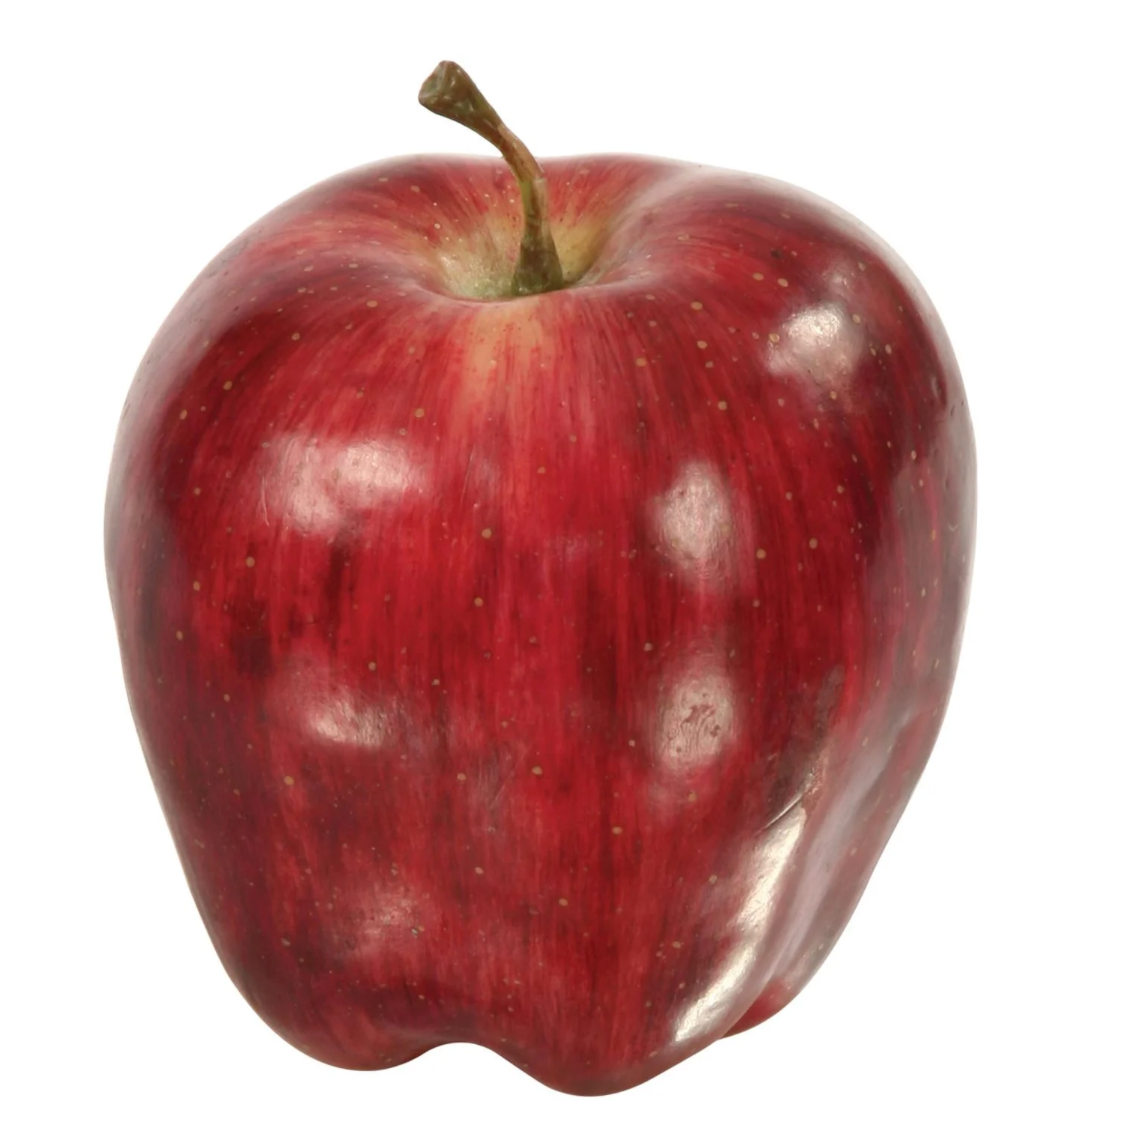 faux red delicious apples at Home Smith